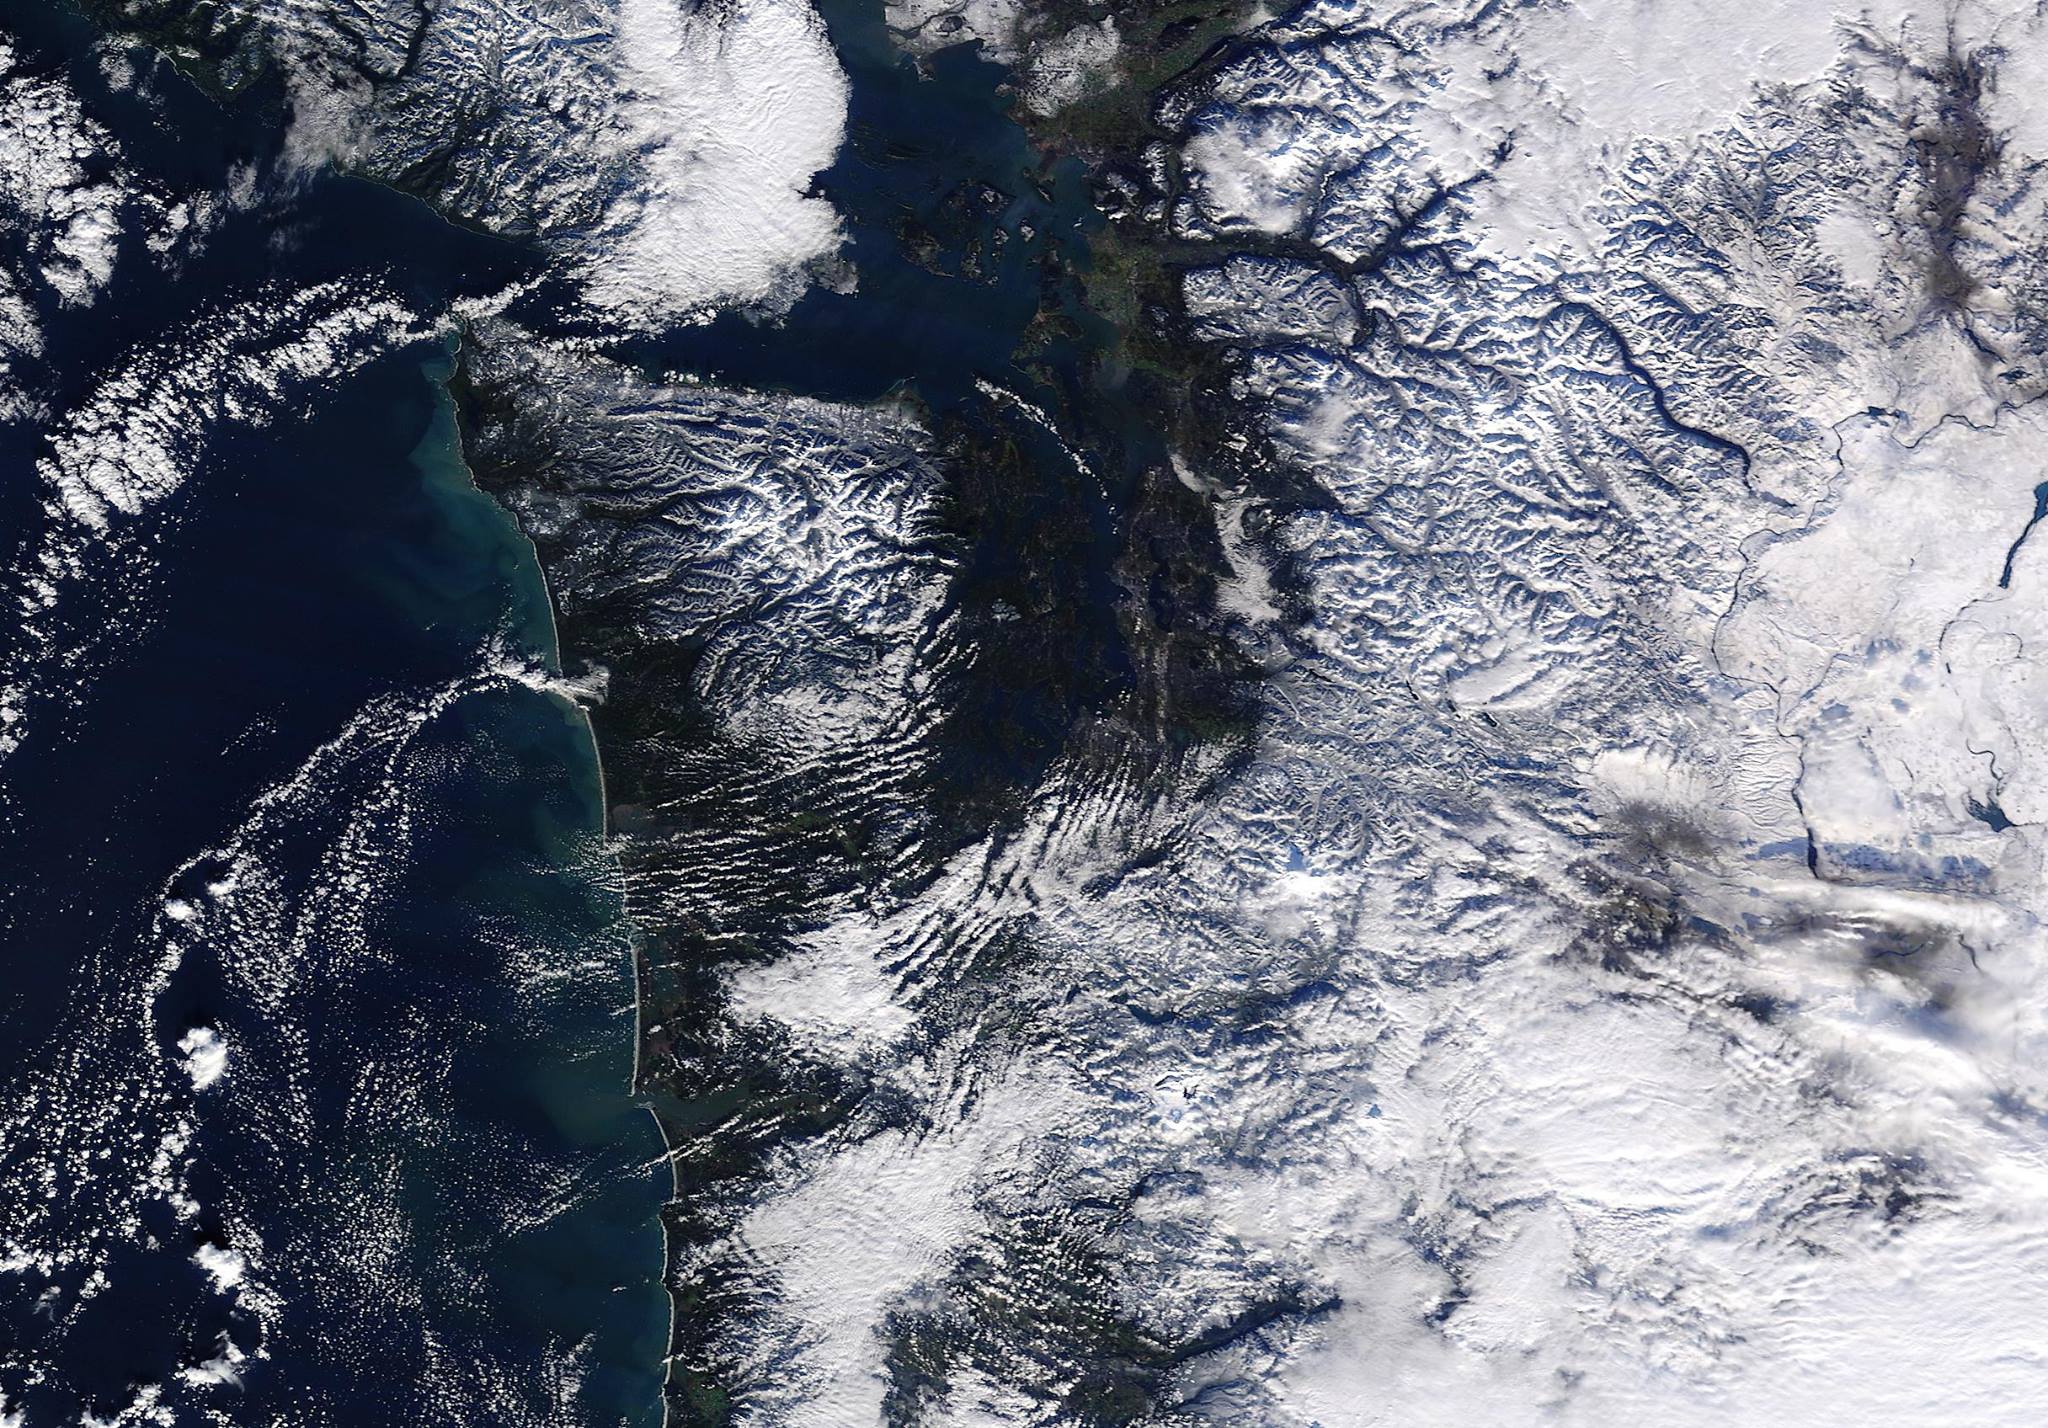 Washington buried in snow yesterday from space. image: nasa, yesterday